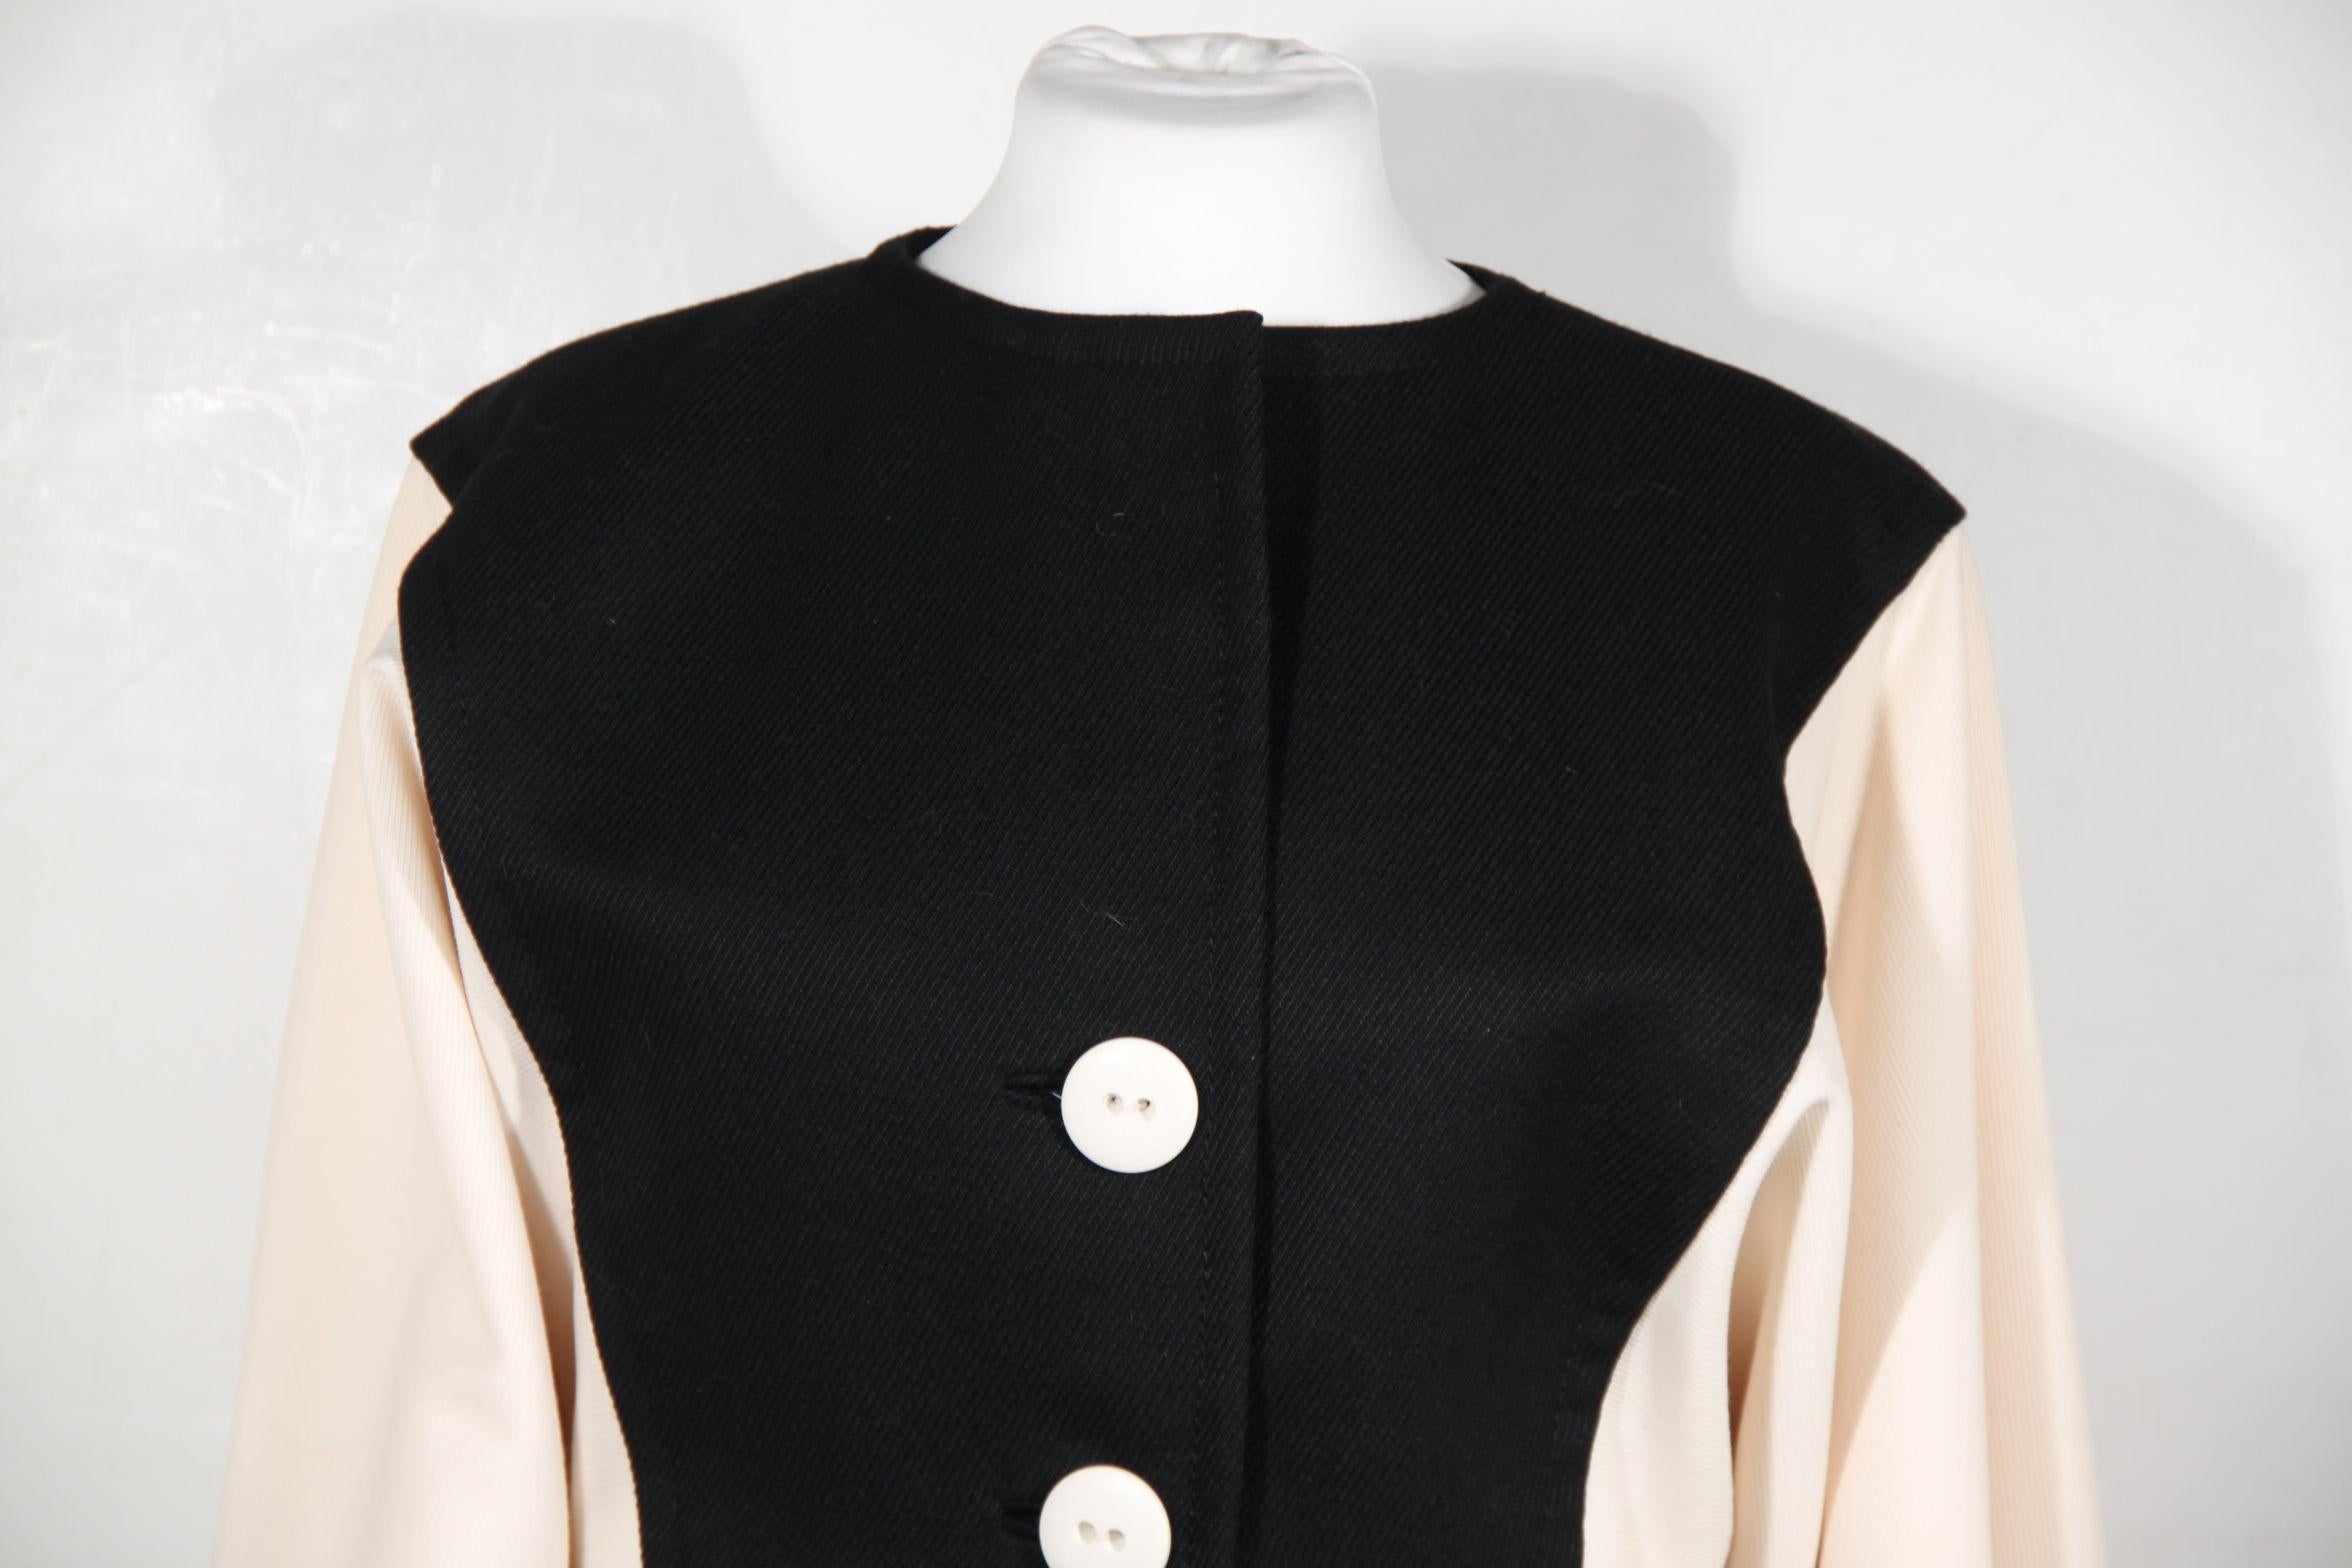 ANDREA ODICINI skirt suit from the 1980s - Made in Italy - Cropped jacket - Collarless design - Pencil skirt with rear zip and hook & eye closure - Black silky lining SKIRT.

MATERIAL: Wool

COLOR: Black, White

MODEL: Suit

GENDER: Women

SIZE: